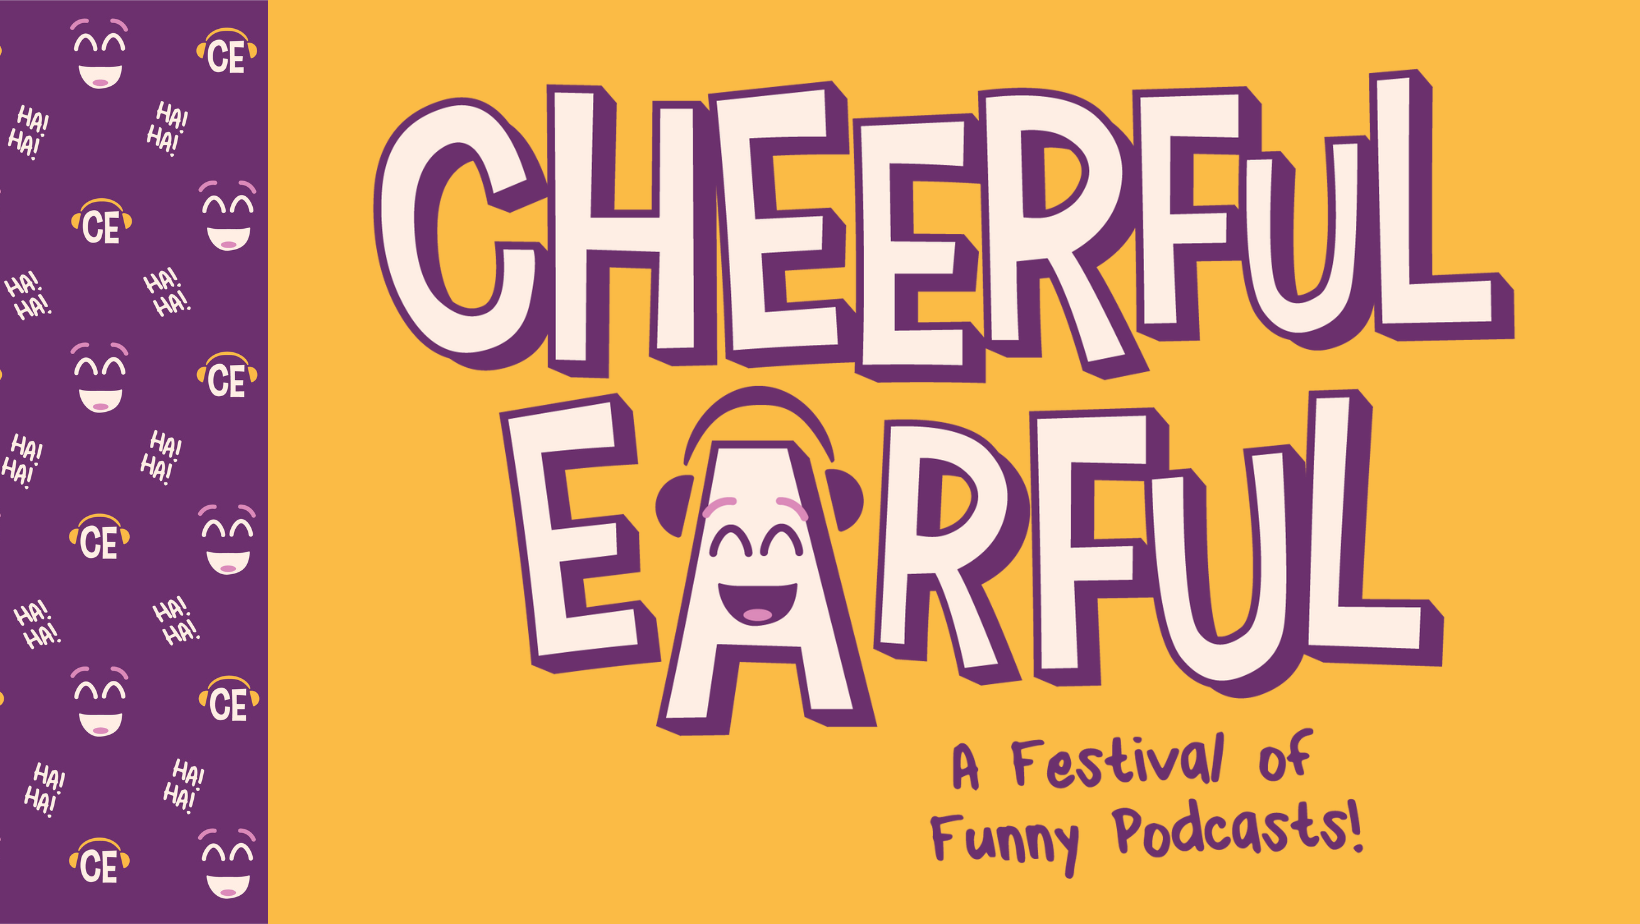 Three Cheers pubs host first comedy podcast festival - Three Cheers Pub Co.